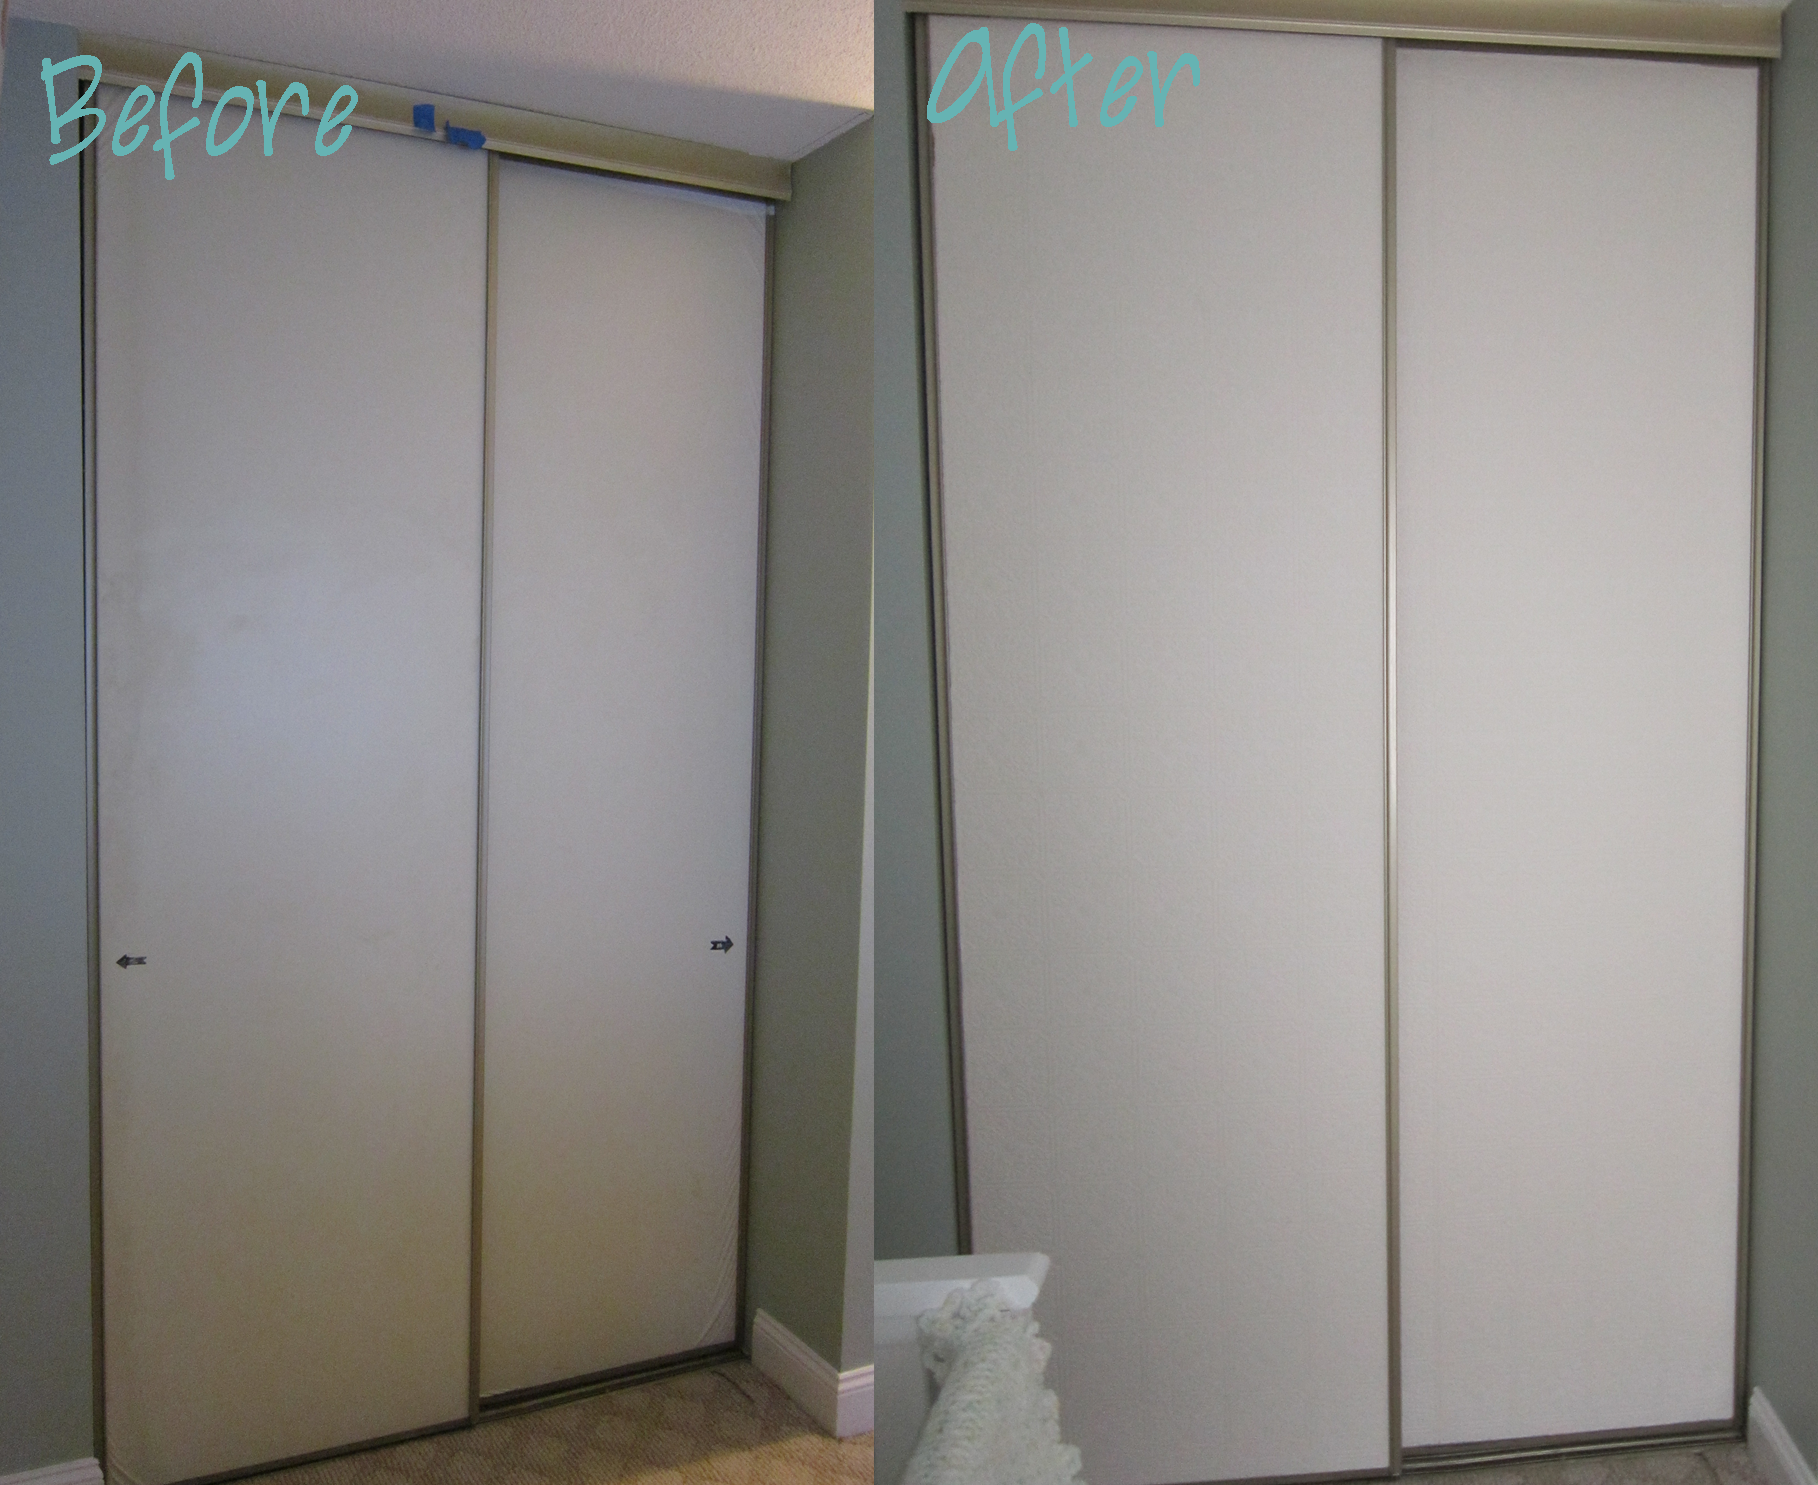 Have You Made Any Closet Door Improvements That Re In Love With